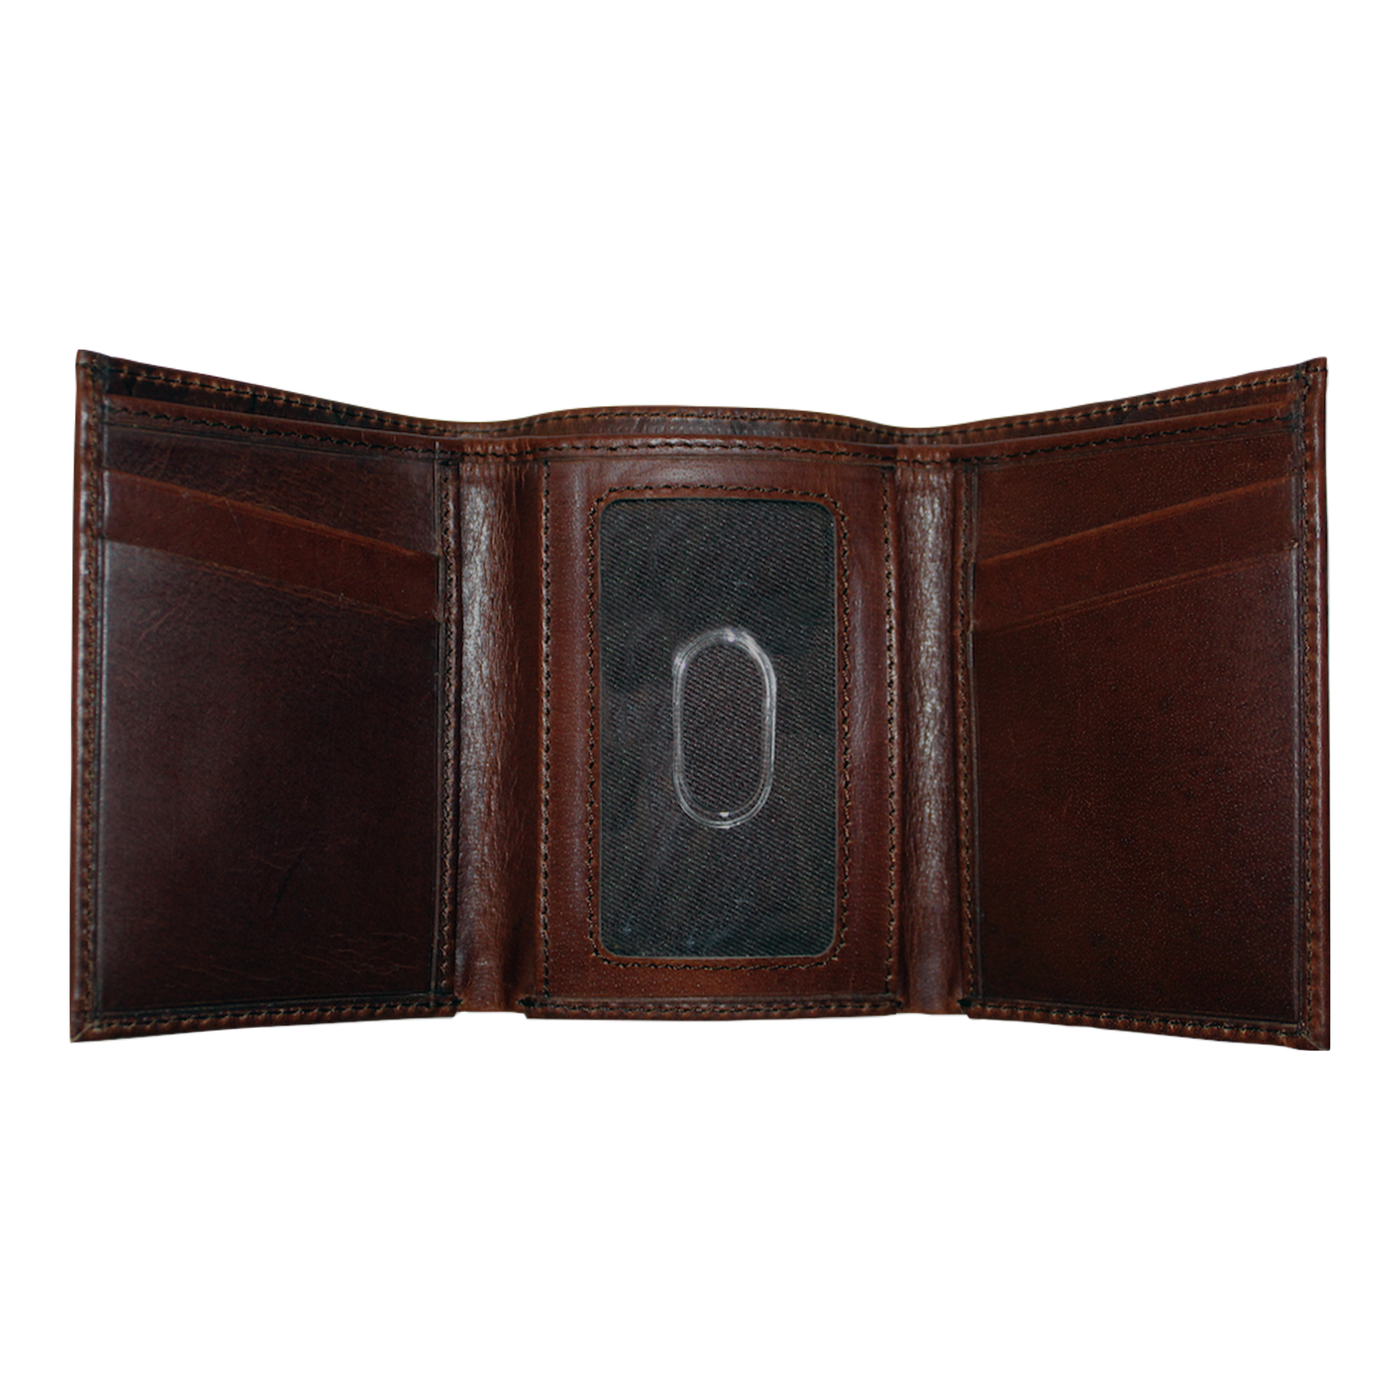 The Pursuit Trifold Marlin Wallet is an exceptional piece with its premier full grain leather and hand-oiled Buffalo finish. The debossed marlin logo found on the exterior of the wallet makes it a stunning piece for any angler's collection. 4 Card Slots 2 Storage Pockets ID Window Bill Compartment Modern Style & Design Dimensions: 3.37"L x 4"H RFID Protection Color: Brown